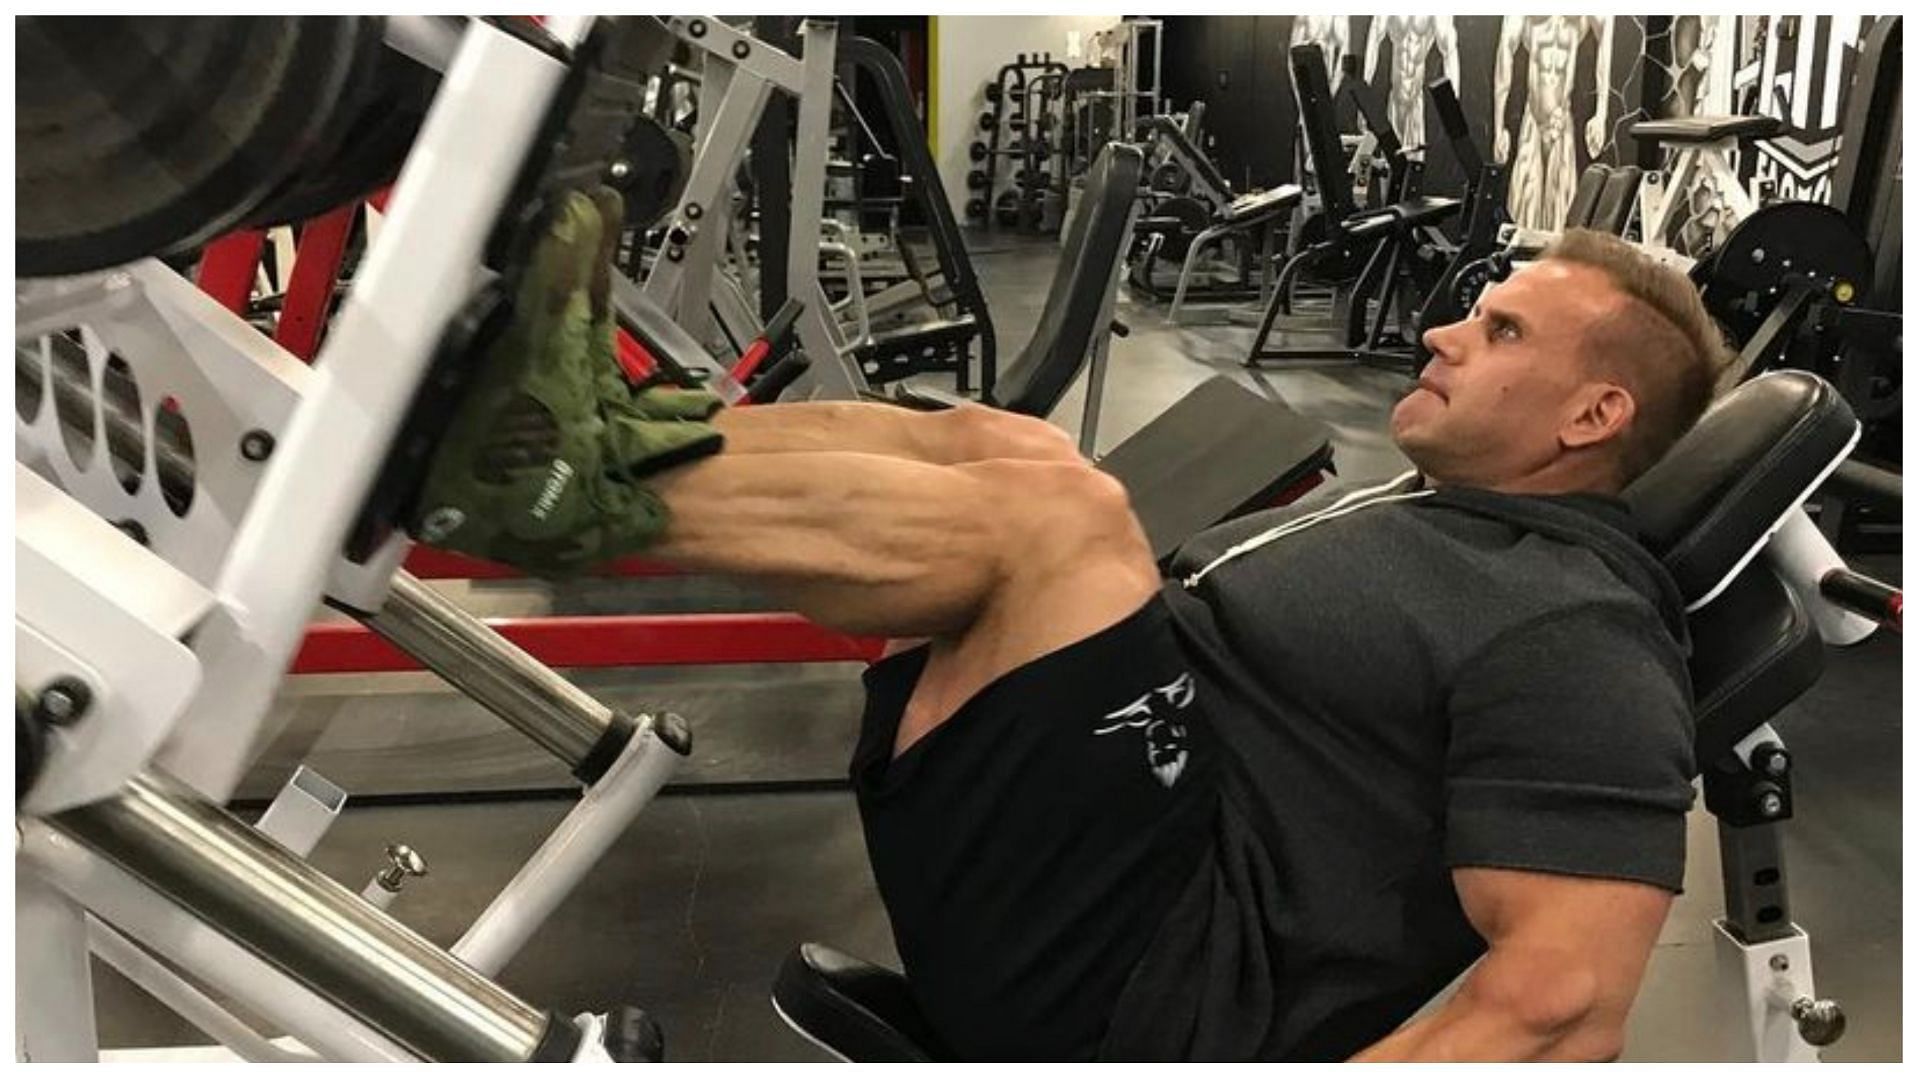 All about Jay Cutler&#039;s leg workout. (Image by @jaycutler via Instagram)